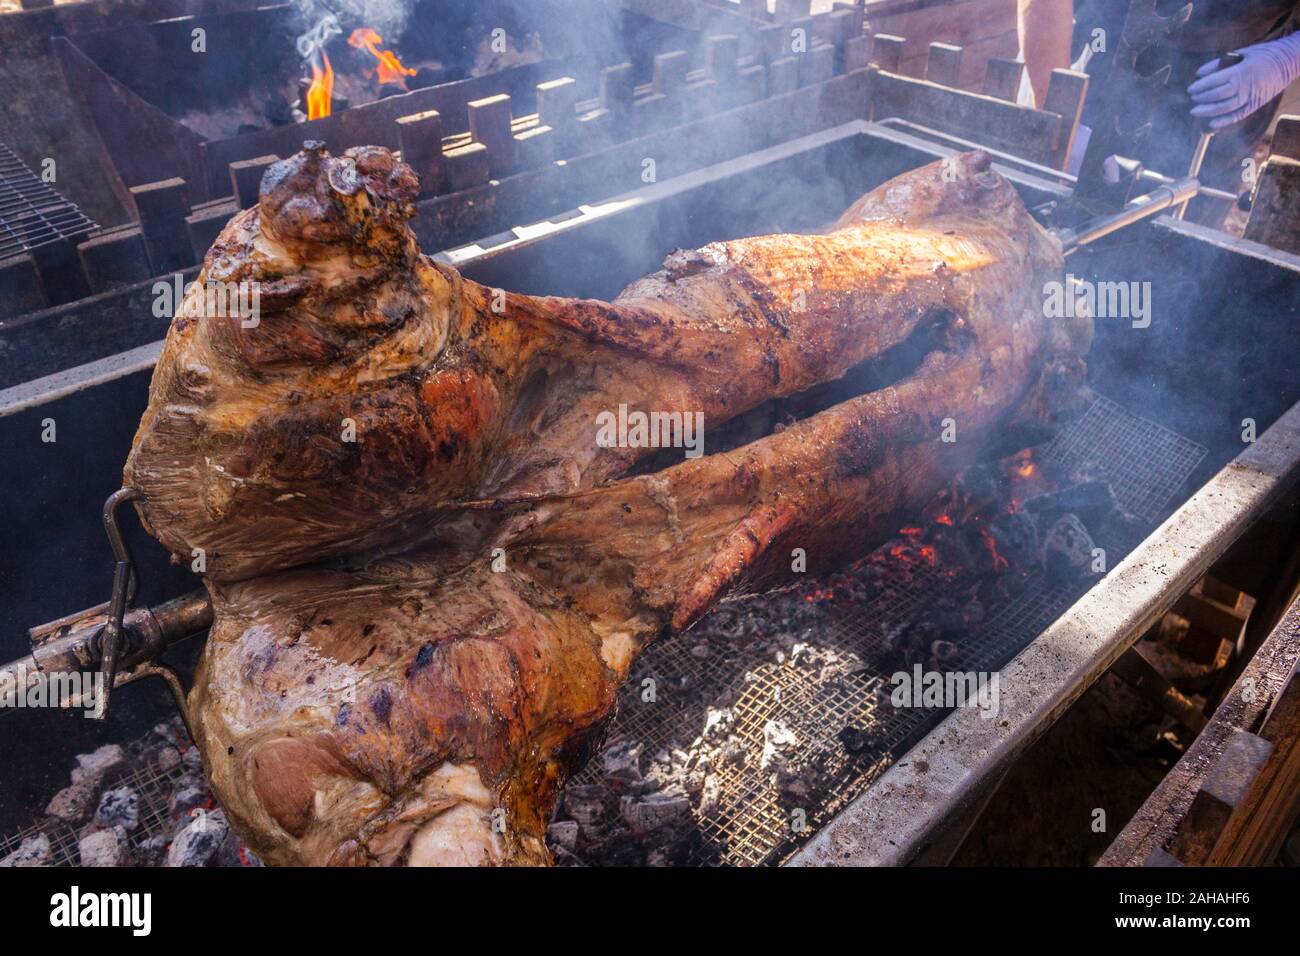 Big Barbecue for a Banquet Stock Photo